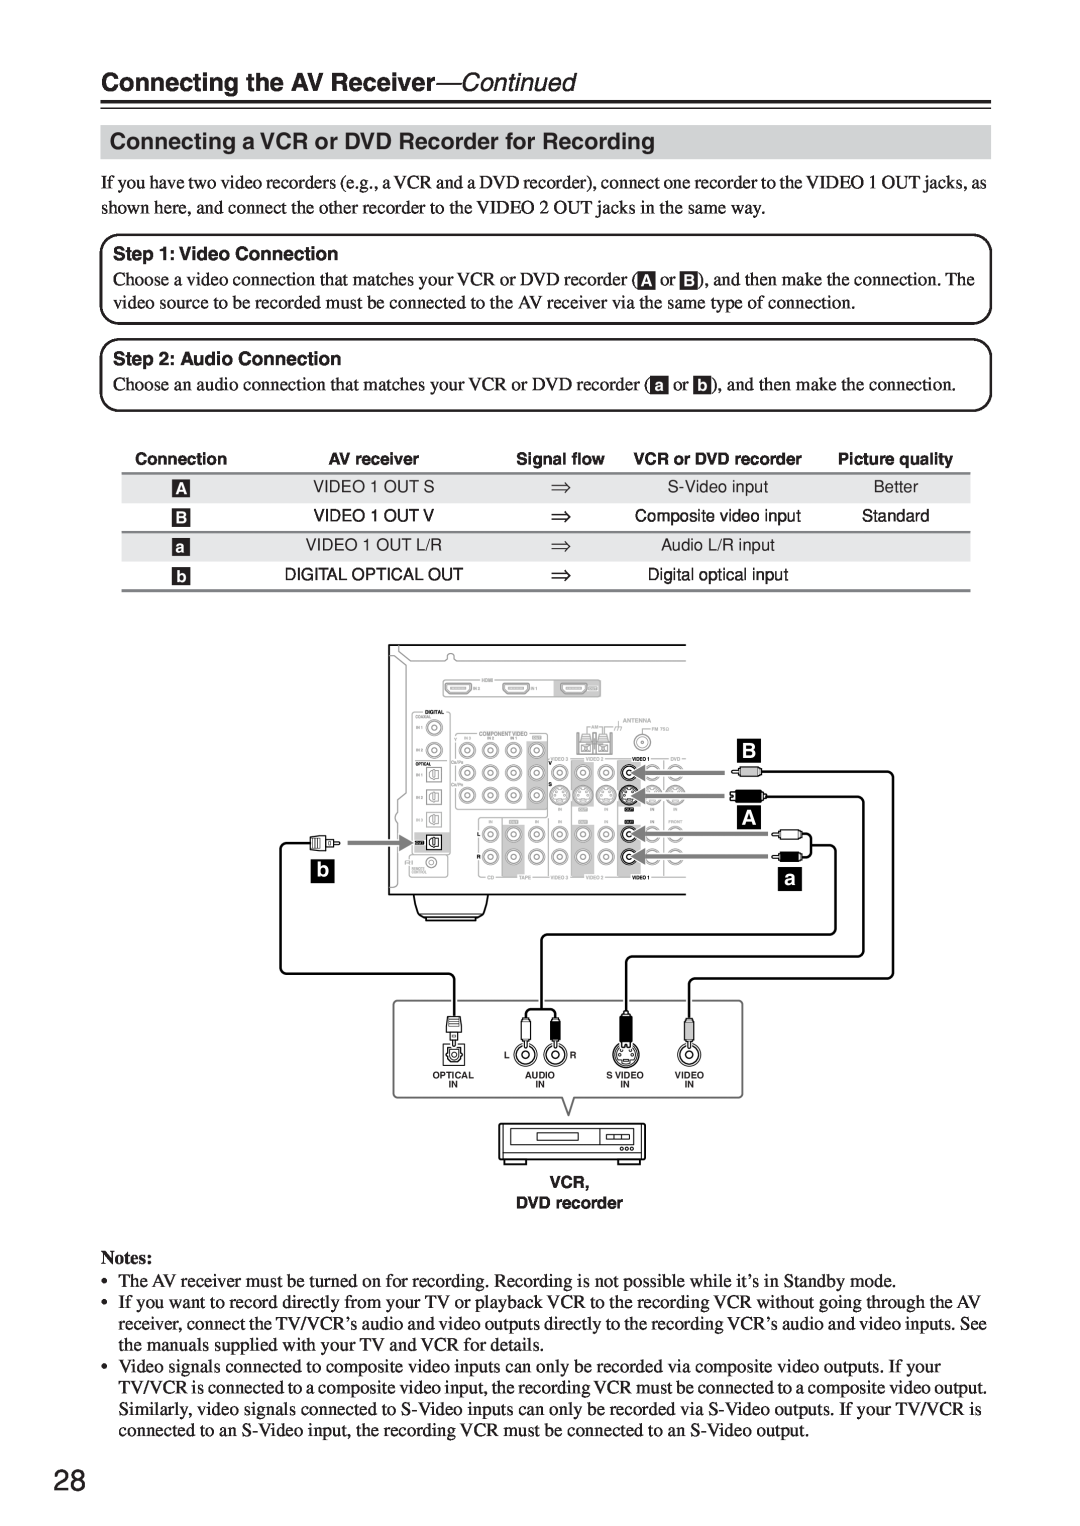 Onkyo HT-R640 instruction manual Connecting a VCR or DVD Recorder for Recording, Connecting the AV Receiver-Continued 